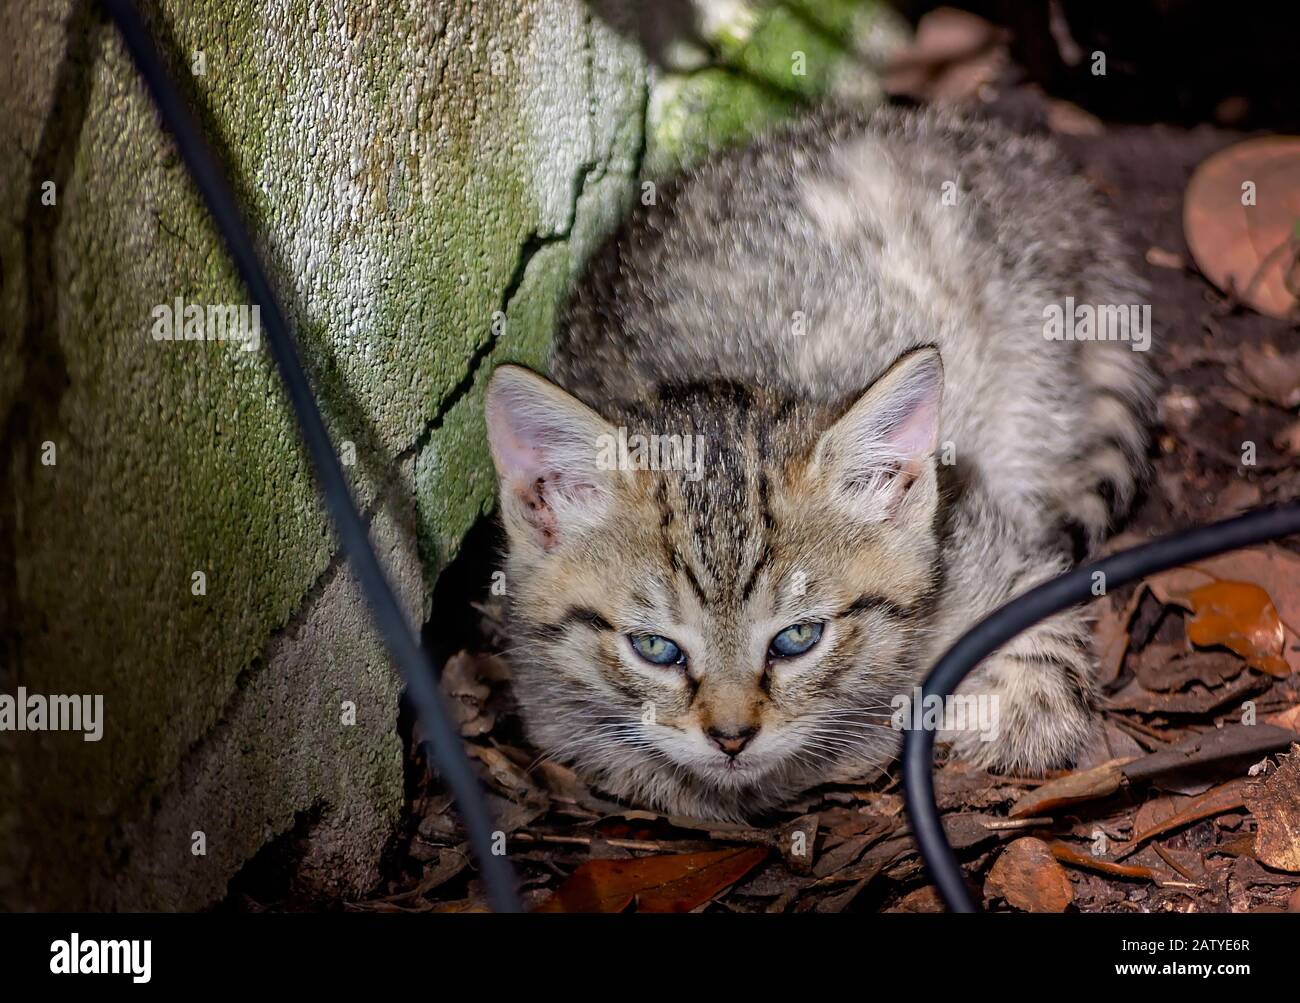 A six-week-old feral tabby kitten lays beneath an abandoned house, Jan. 30, 2020, in Coden, Alabama. Stock Photo